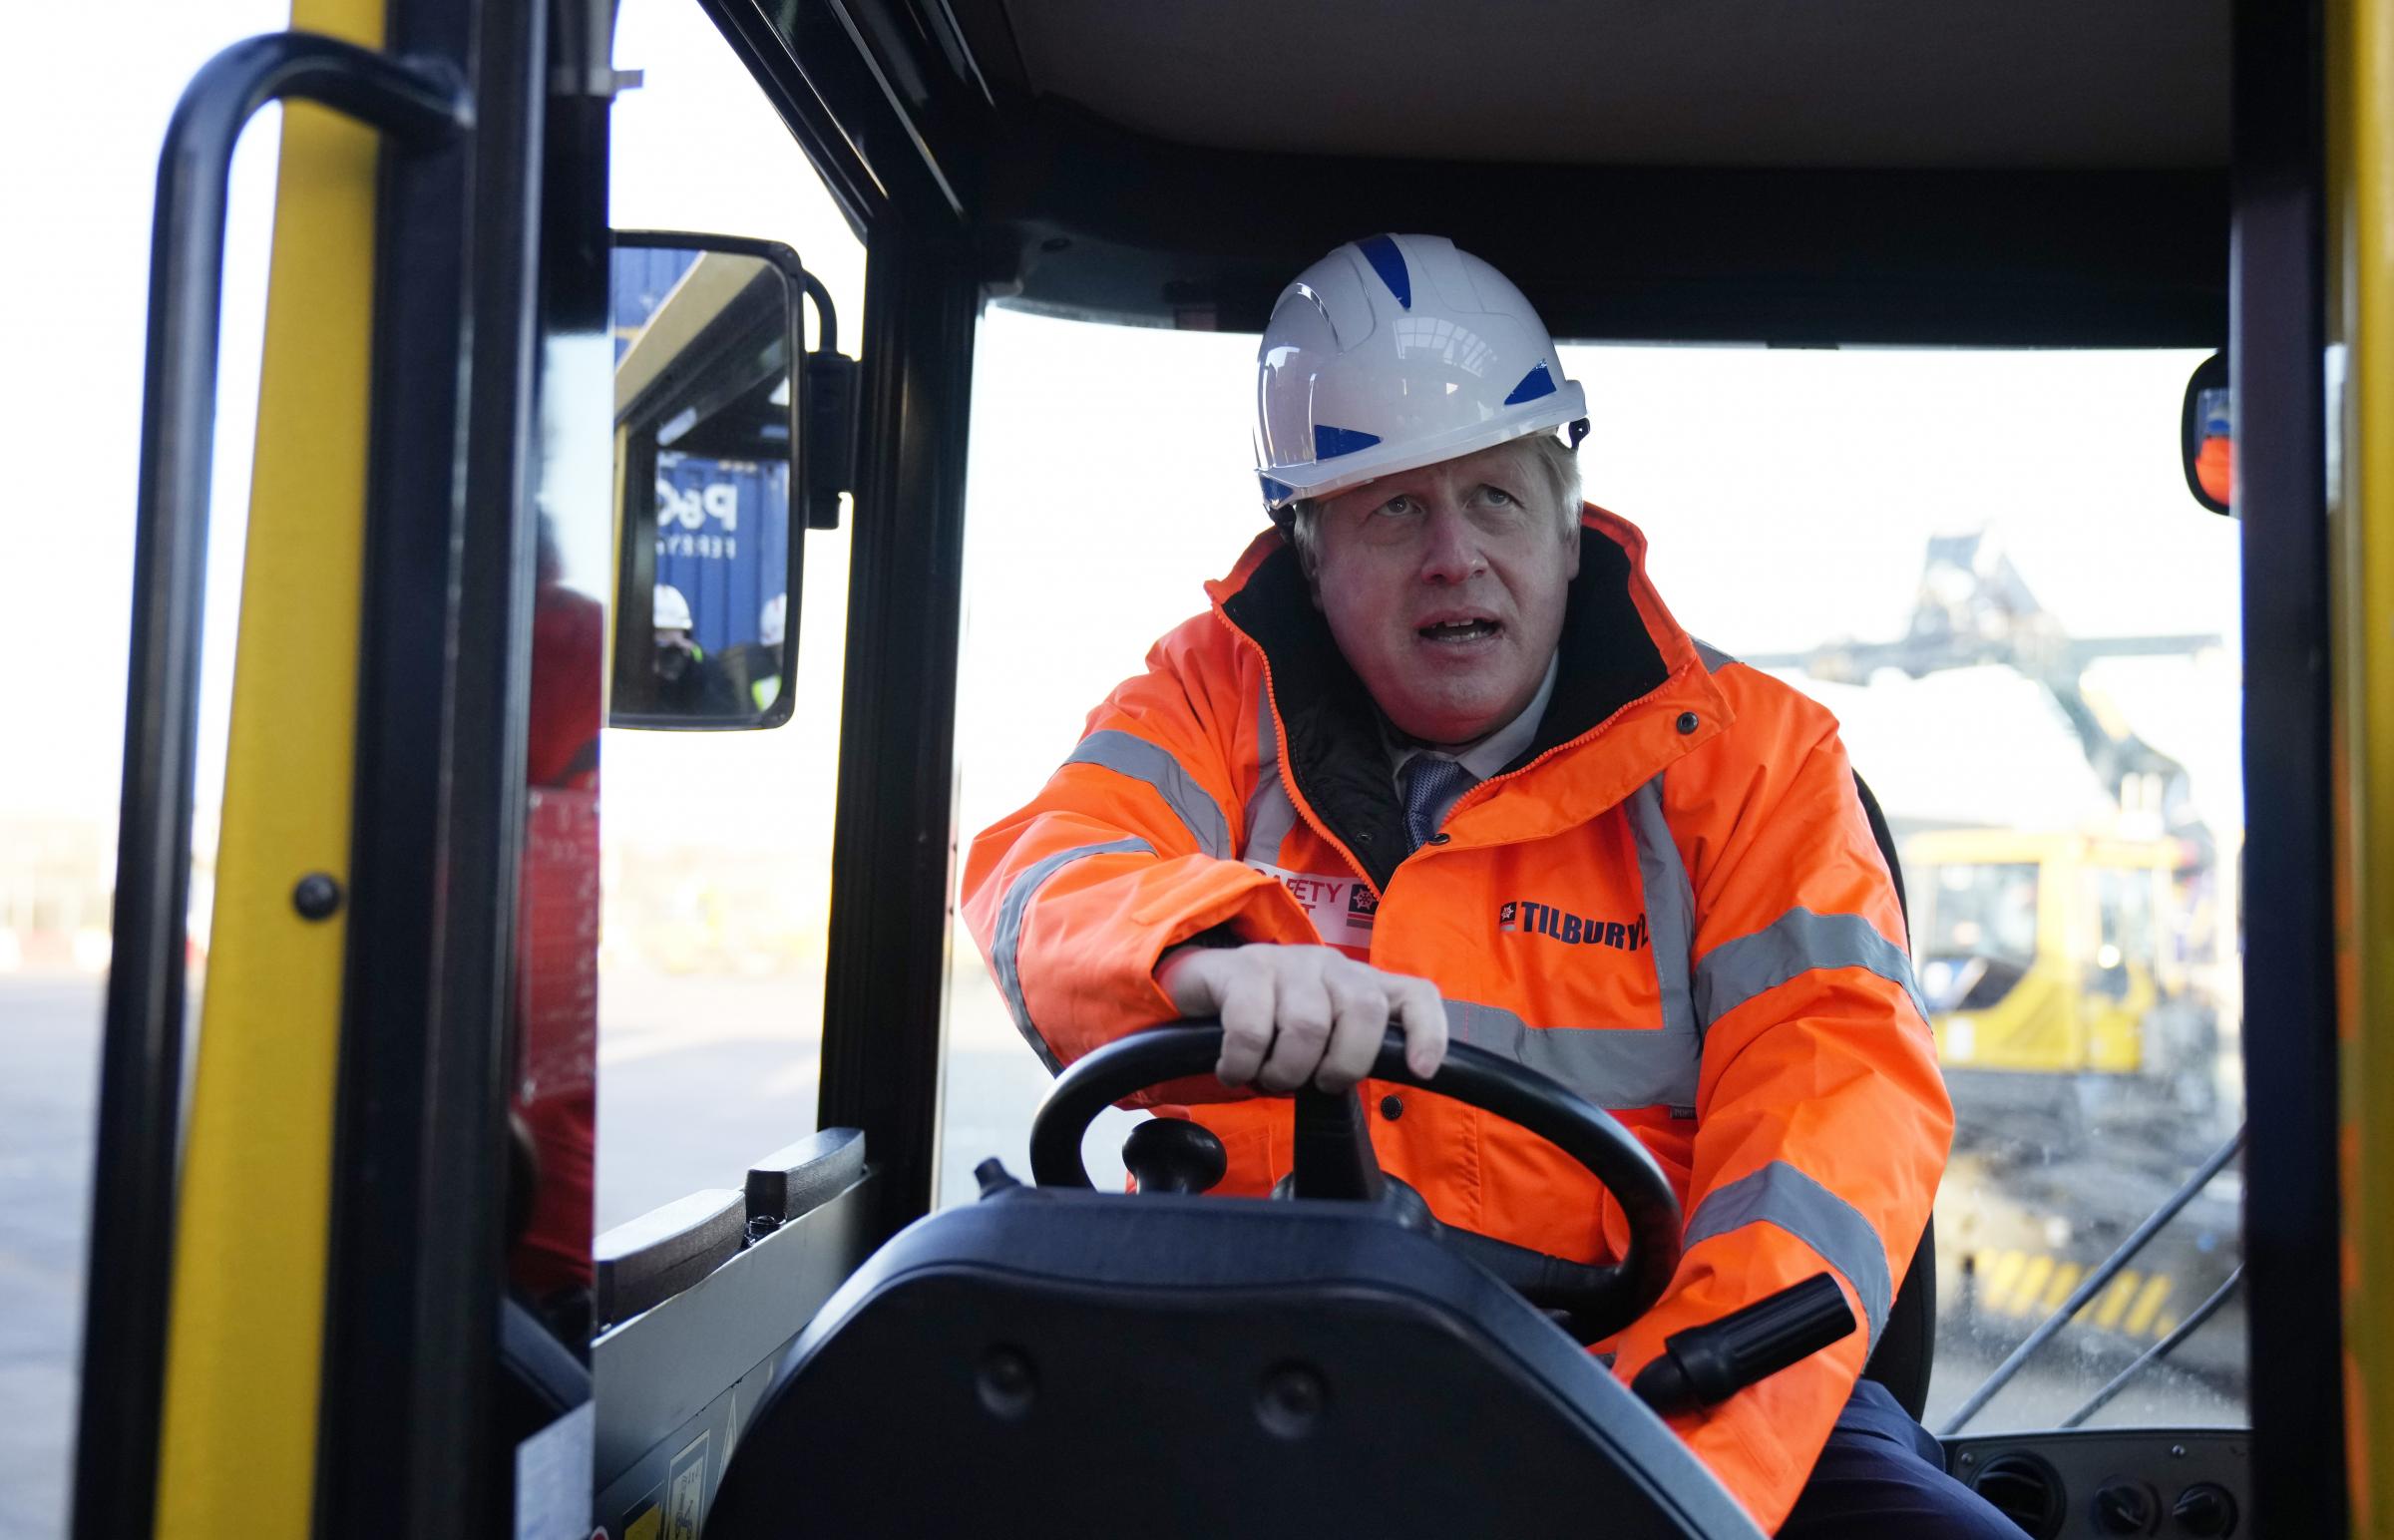 Prime Minister Boris Johnson drives a forklift as he visits the Tilbury Docks in Essex. Picture date: Monday January 31, 2022.